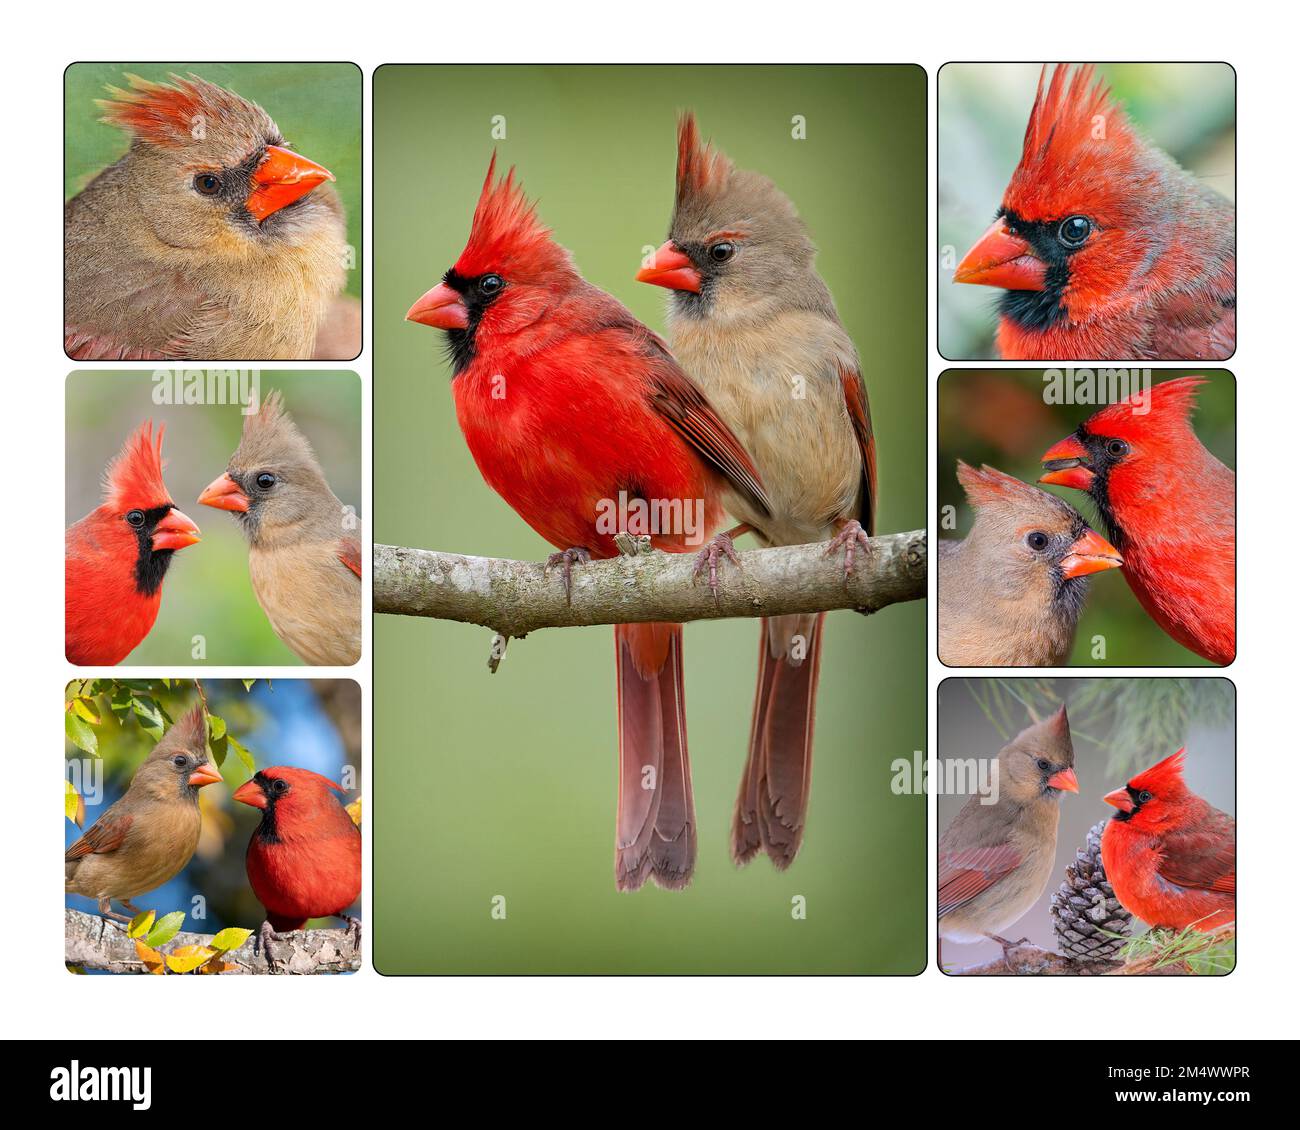 Poster Containing Seven Images of Northern Cardinal Mates Photographed in Southern Louisiana Stock Photo